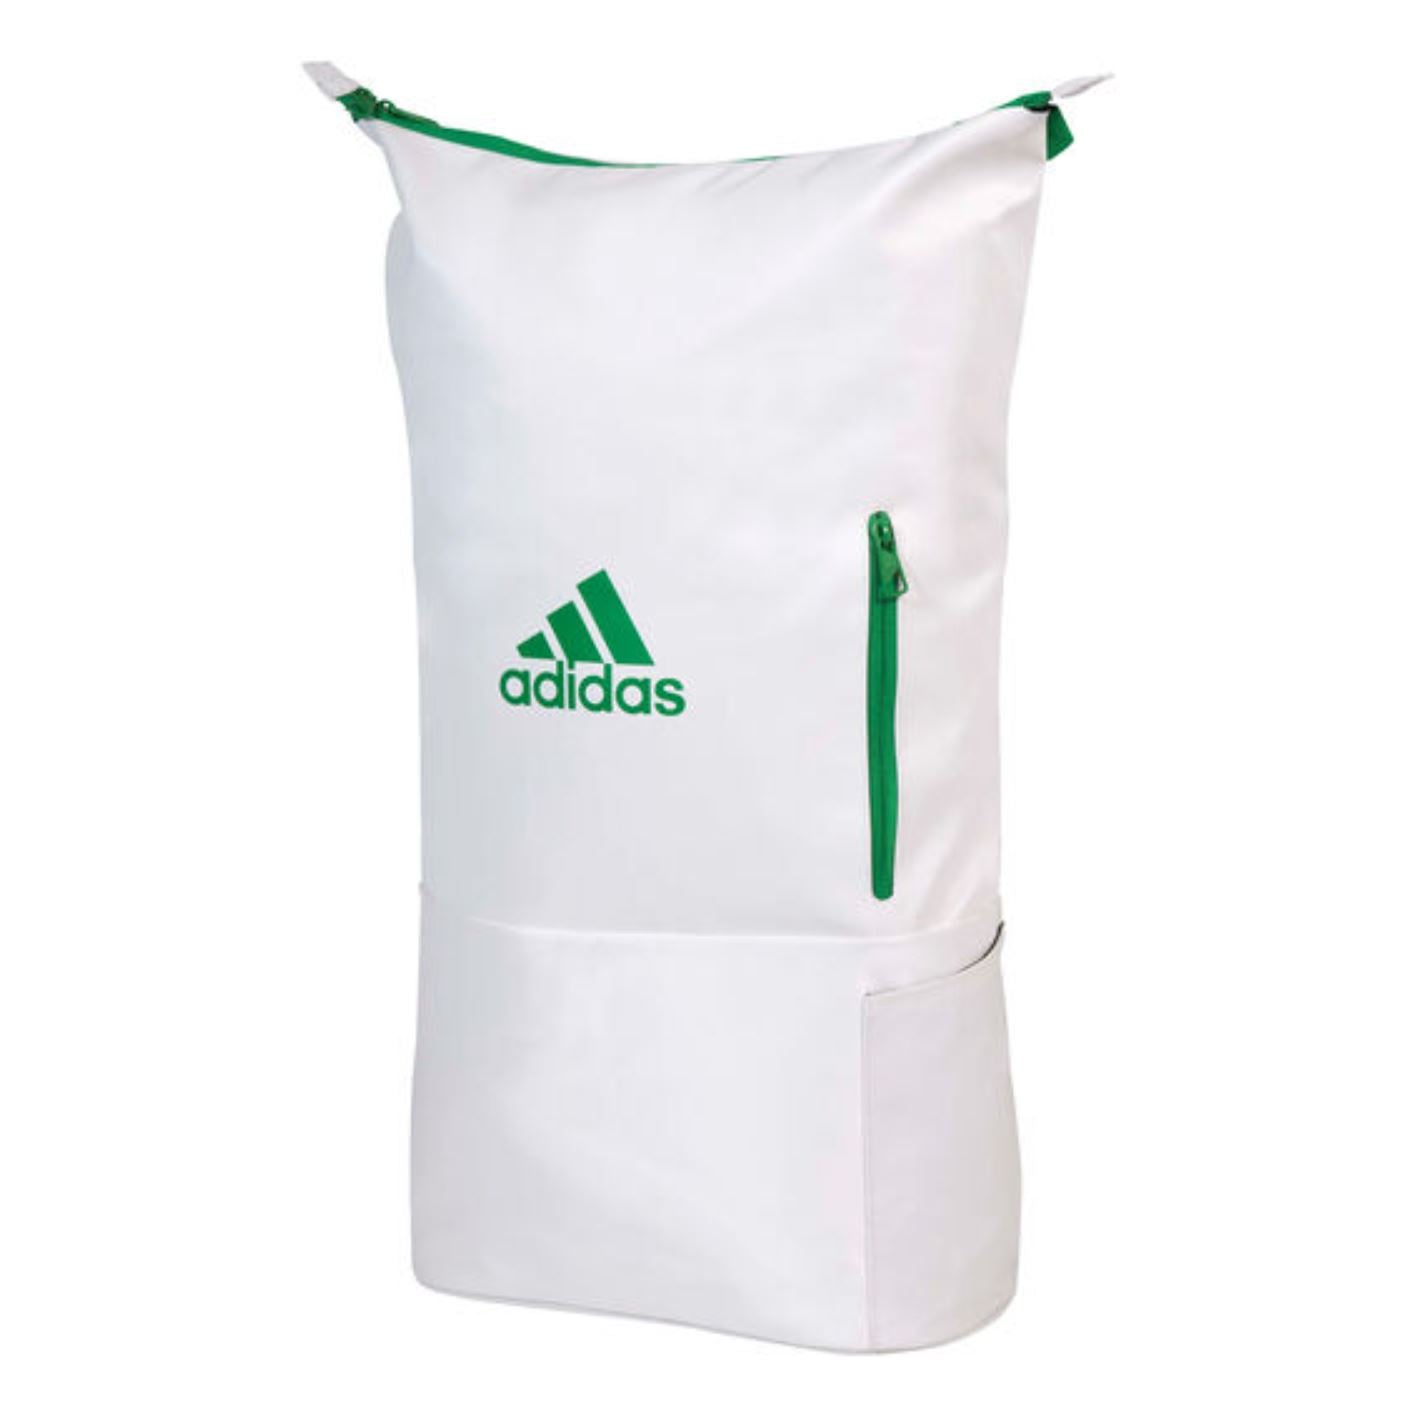 Adidas Multigame Backpack (White/Green)